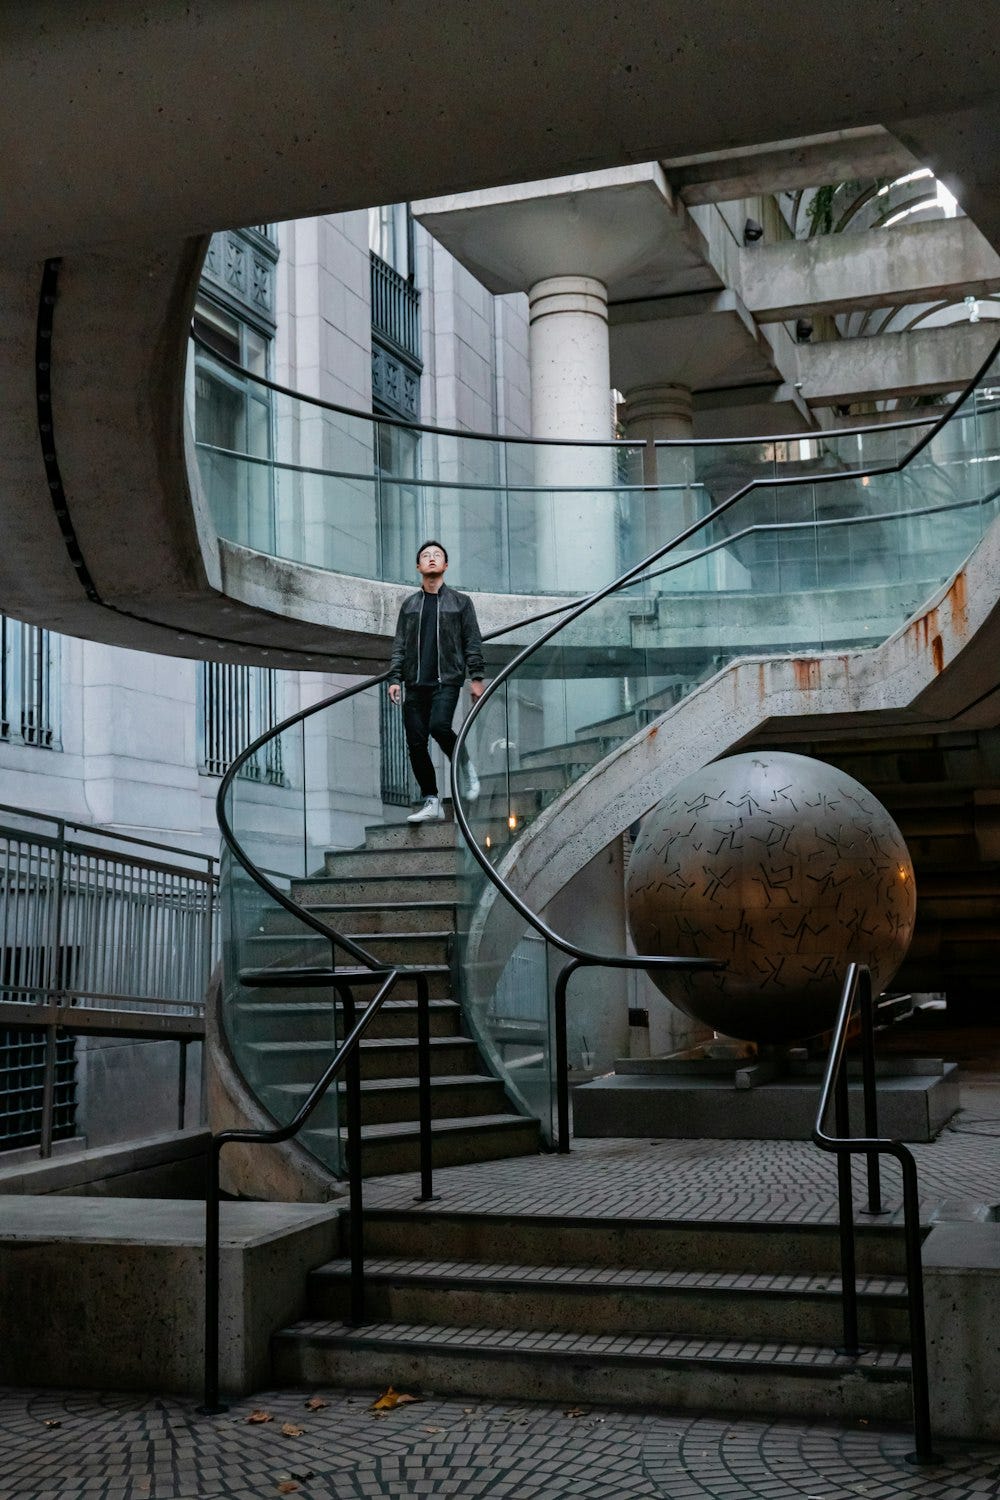 Descending a spiral staircase, a man is accompanied by a captivating circular globe embedded in the ground to the right as he reaches the end of the stairwell.